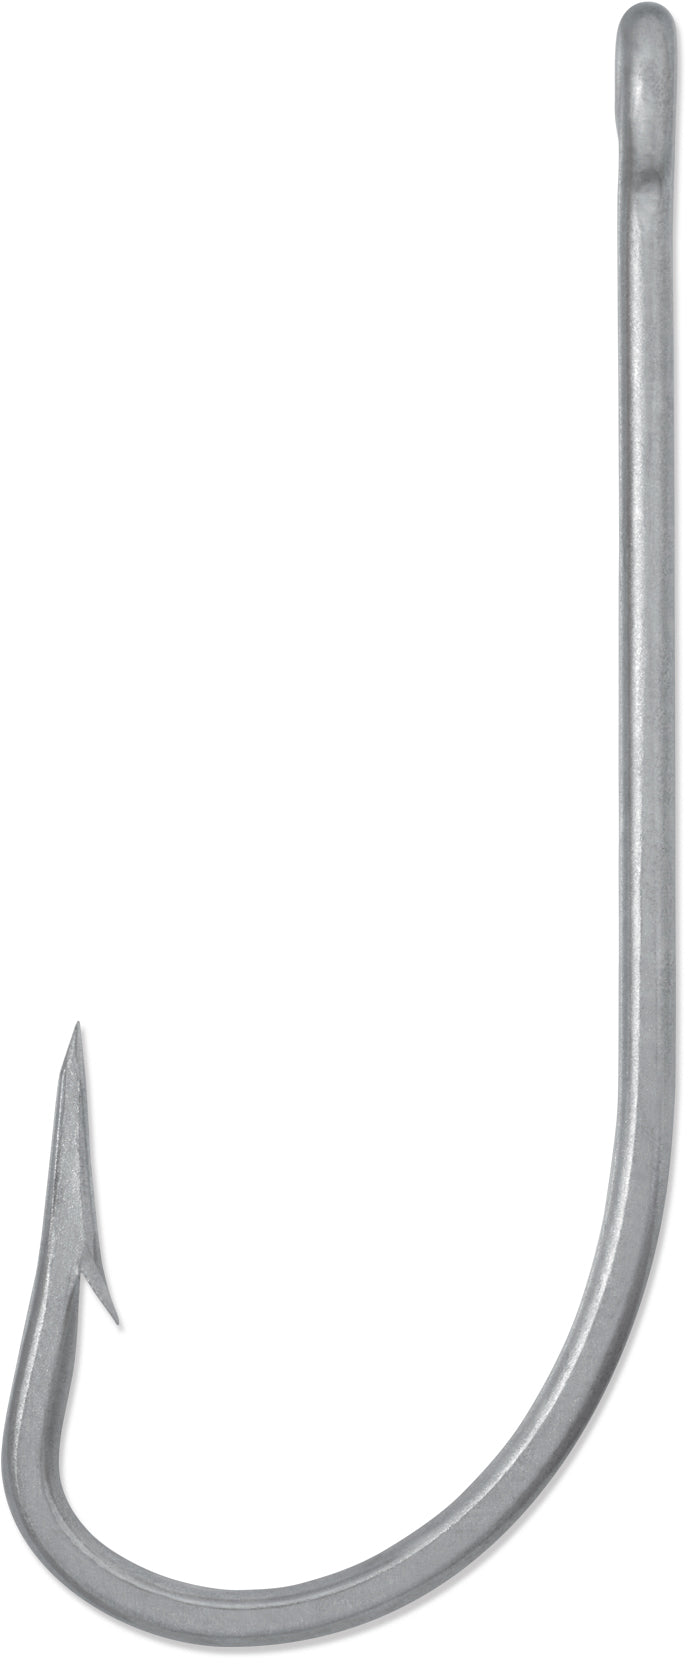 O'Shaughnessy Hook - Stainless Steel - 8 / Stainless Steel / 10